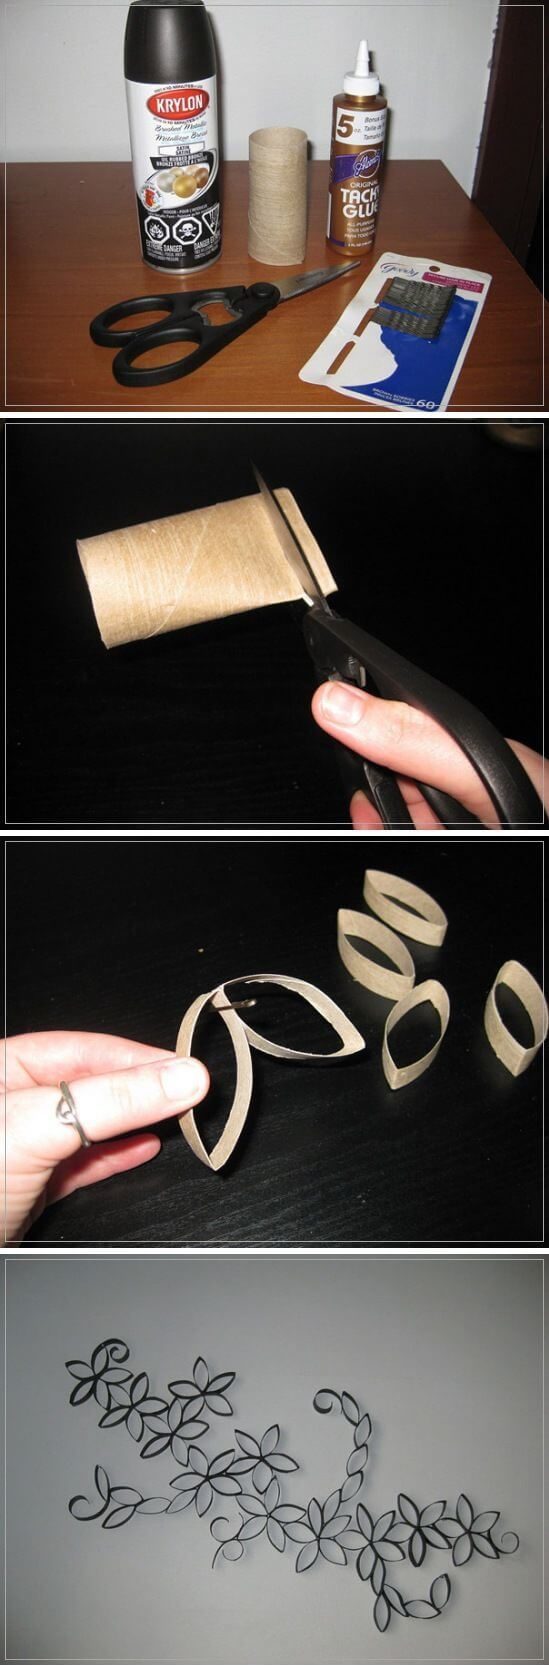 3- Decorating with toilet paper rolls